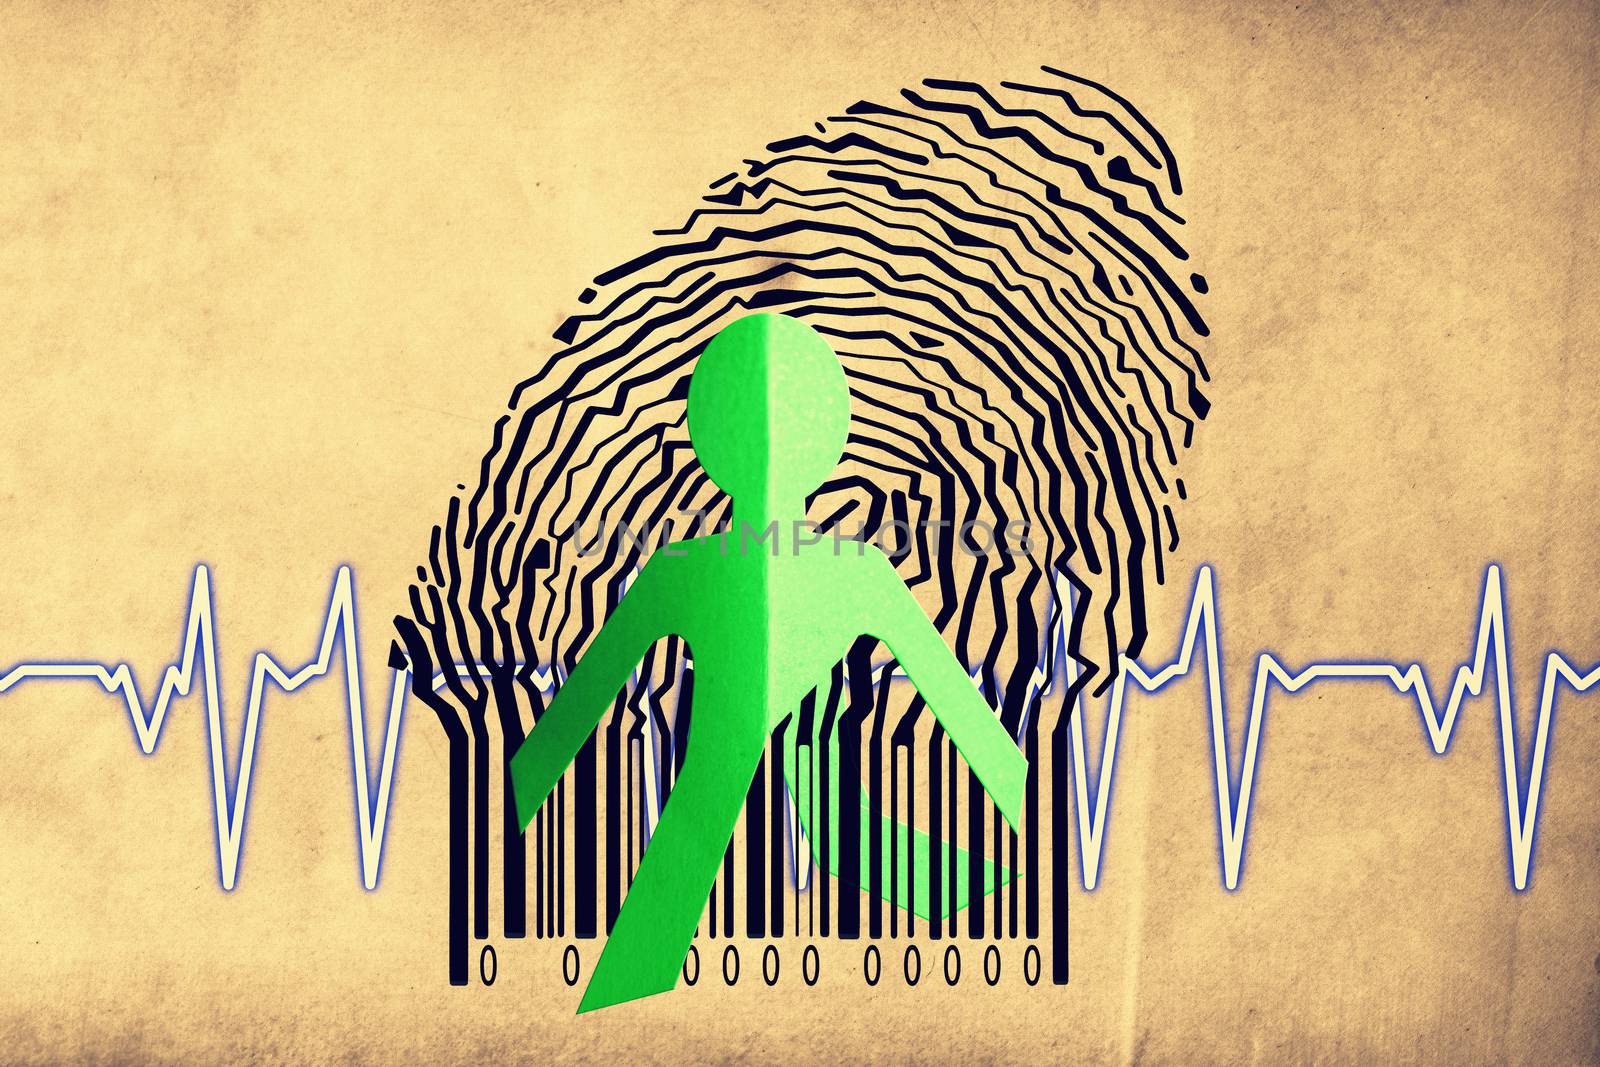 Paperman coming out of a bar code with cardiogram